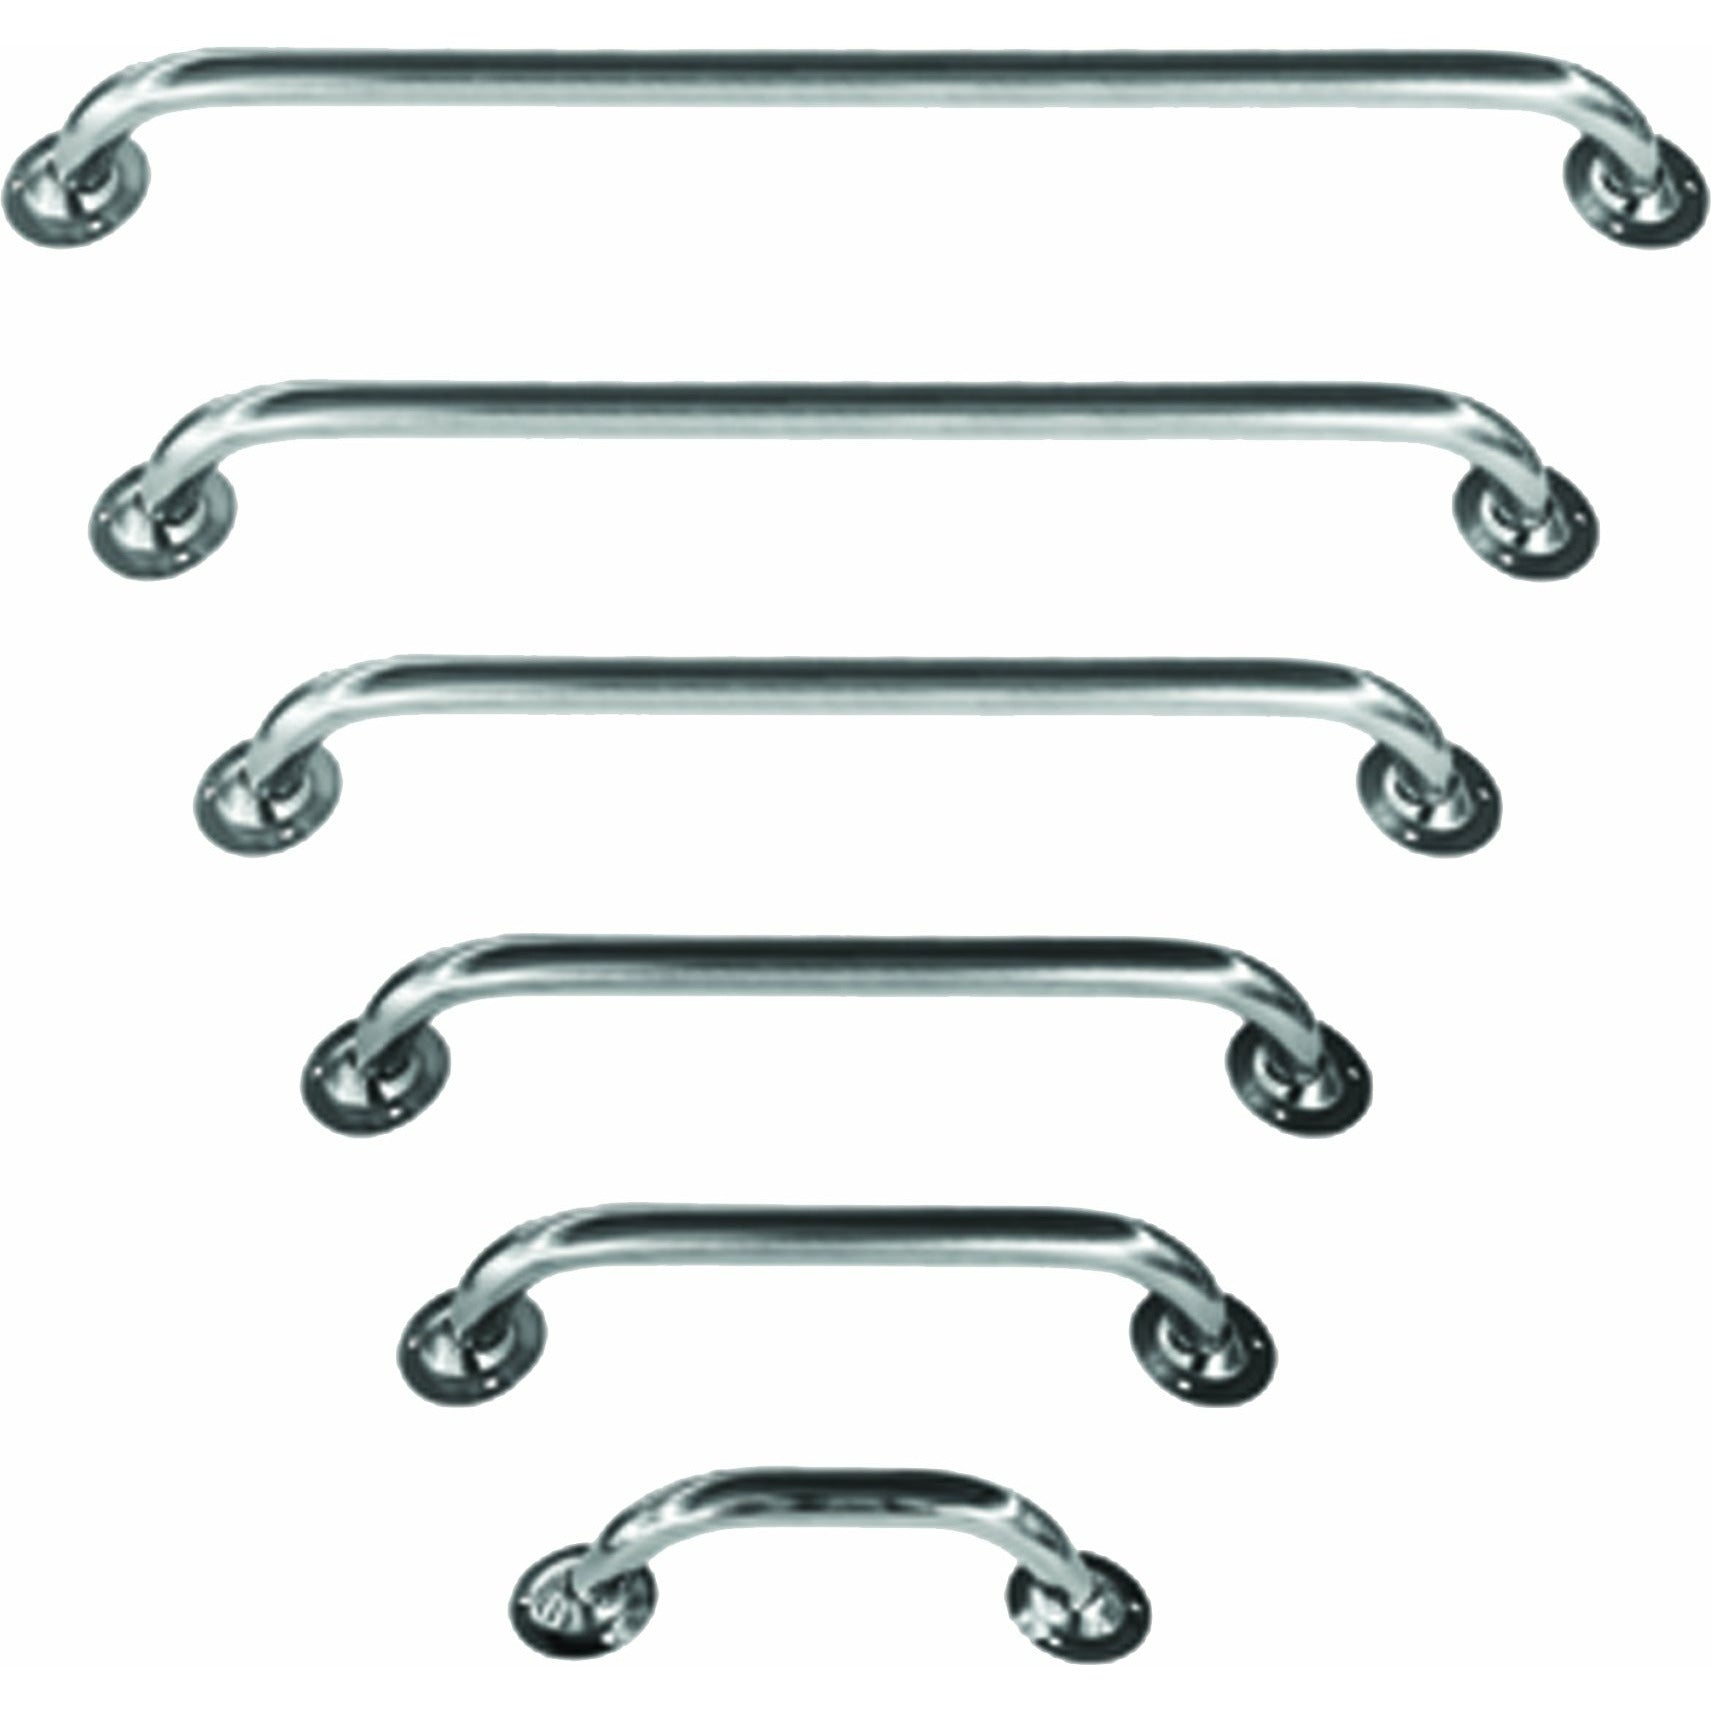 Talamex S.Steel Hand Rails With Bases 22X500 72135250